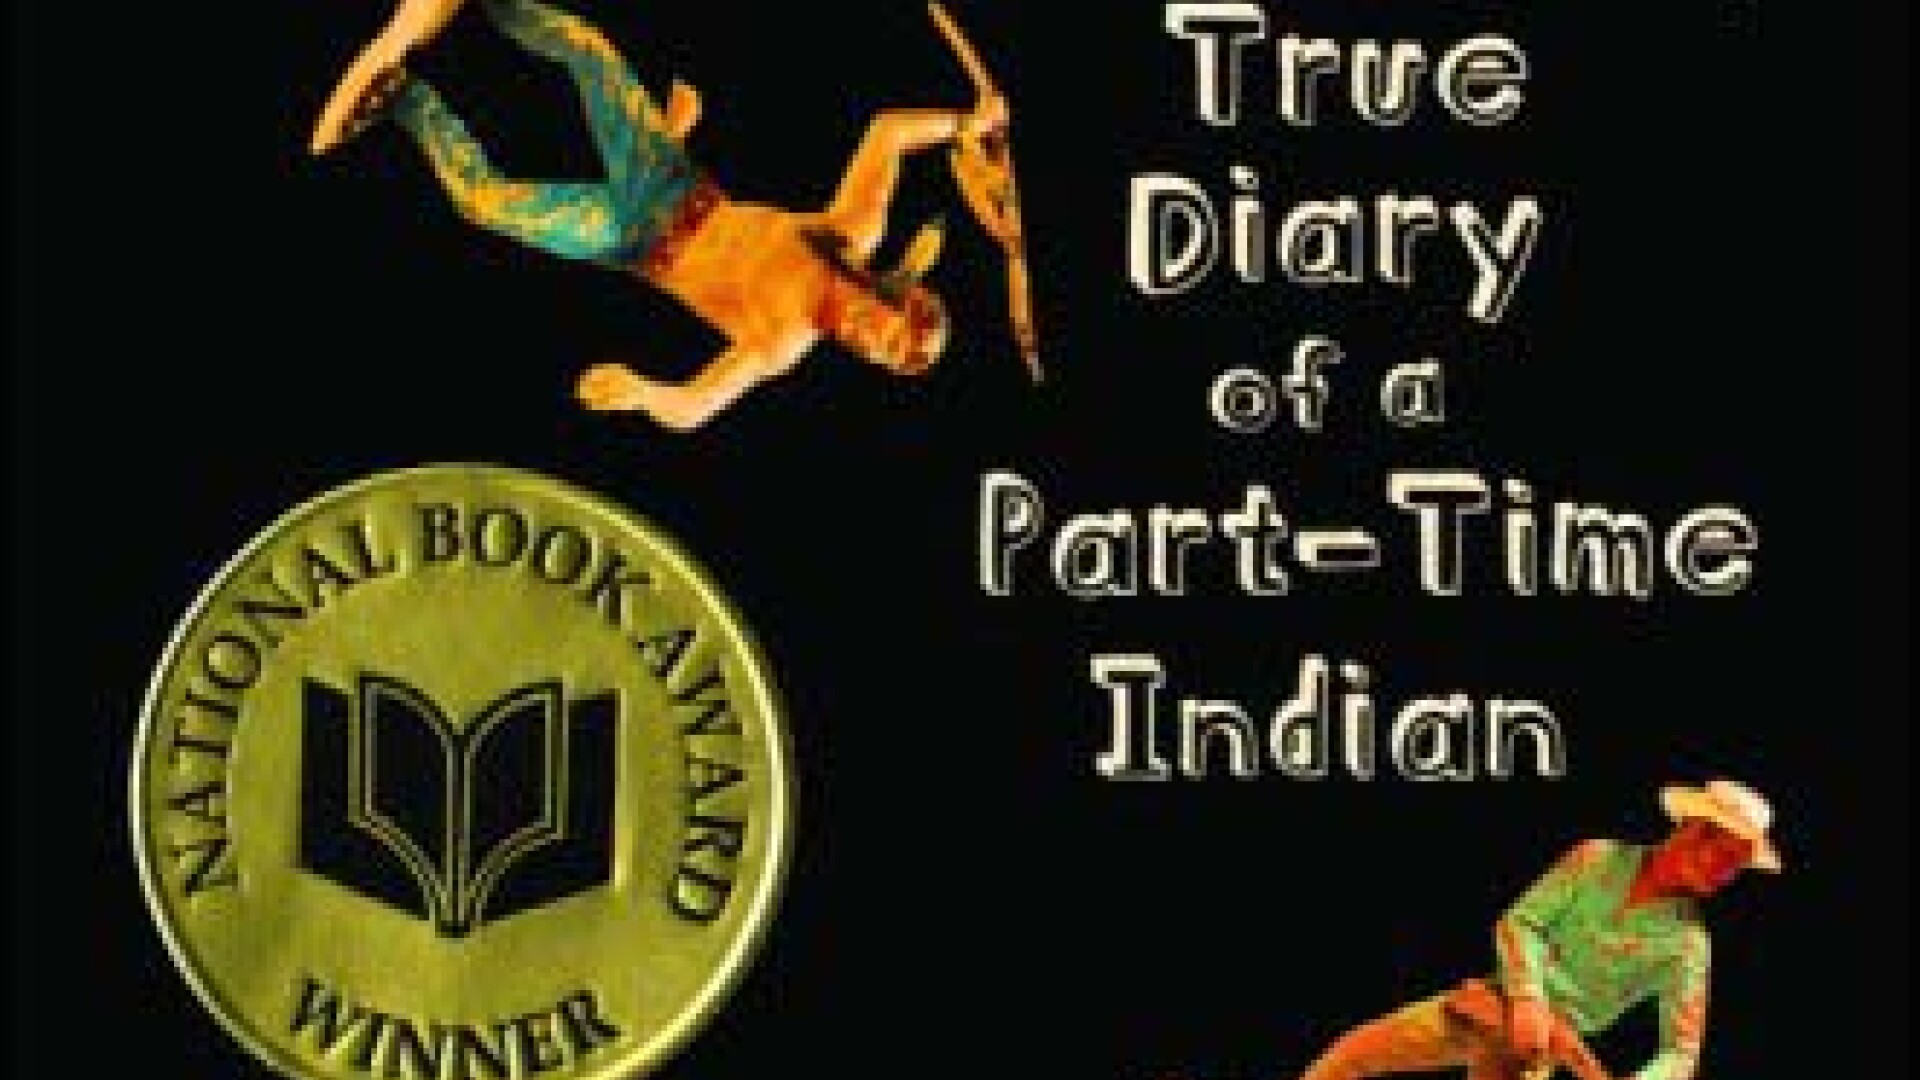 The Absolutely True Diary of a Part-Time Indian